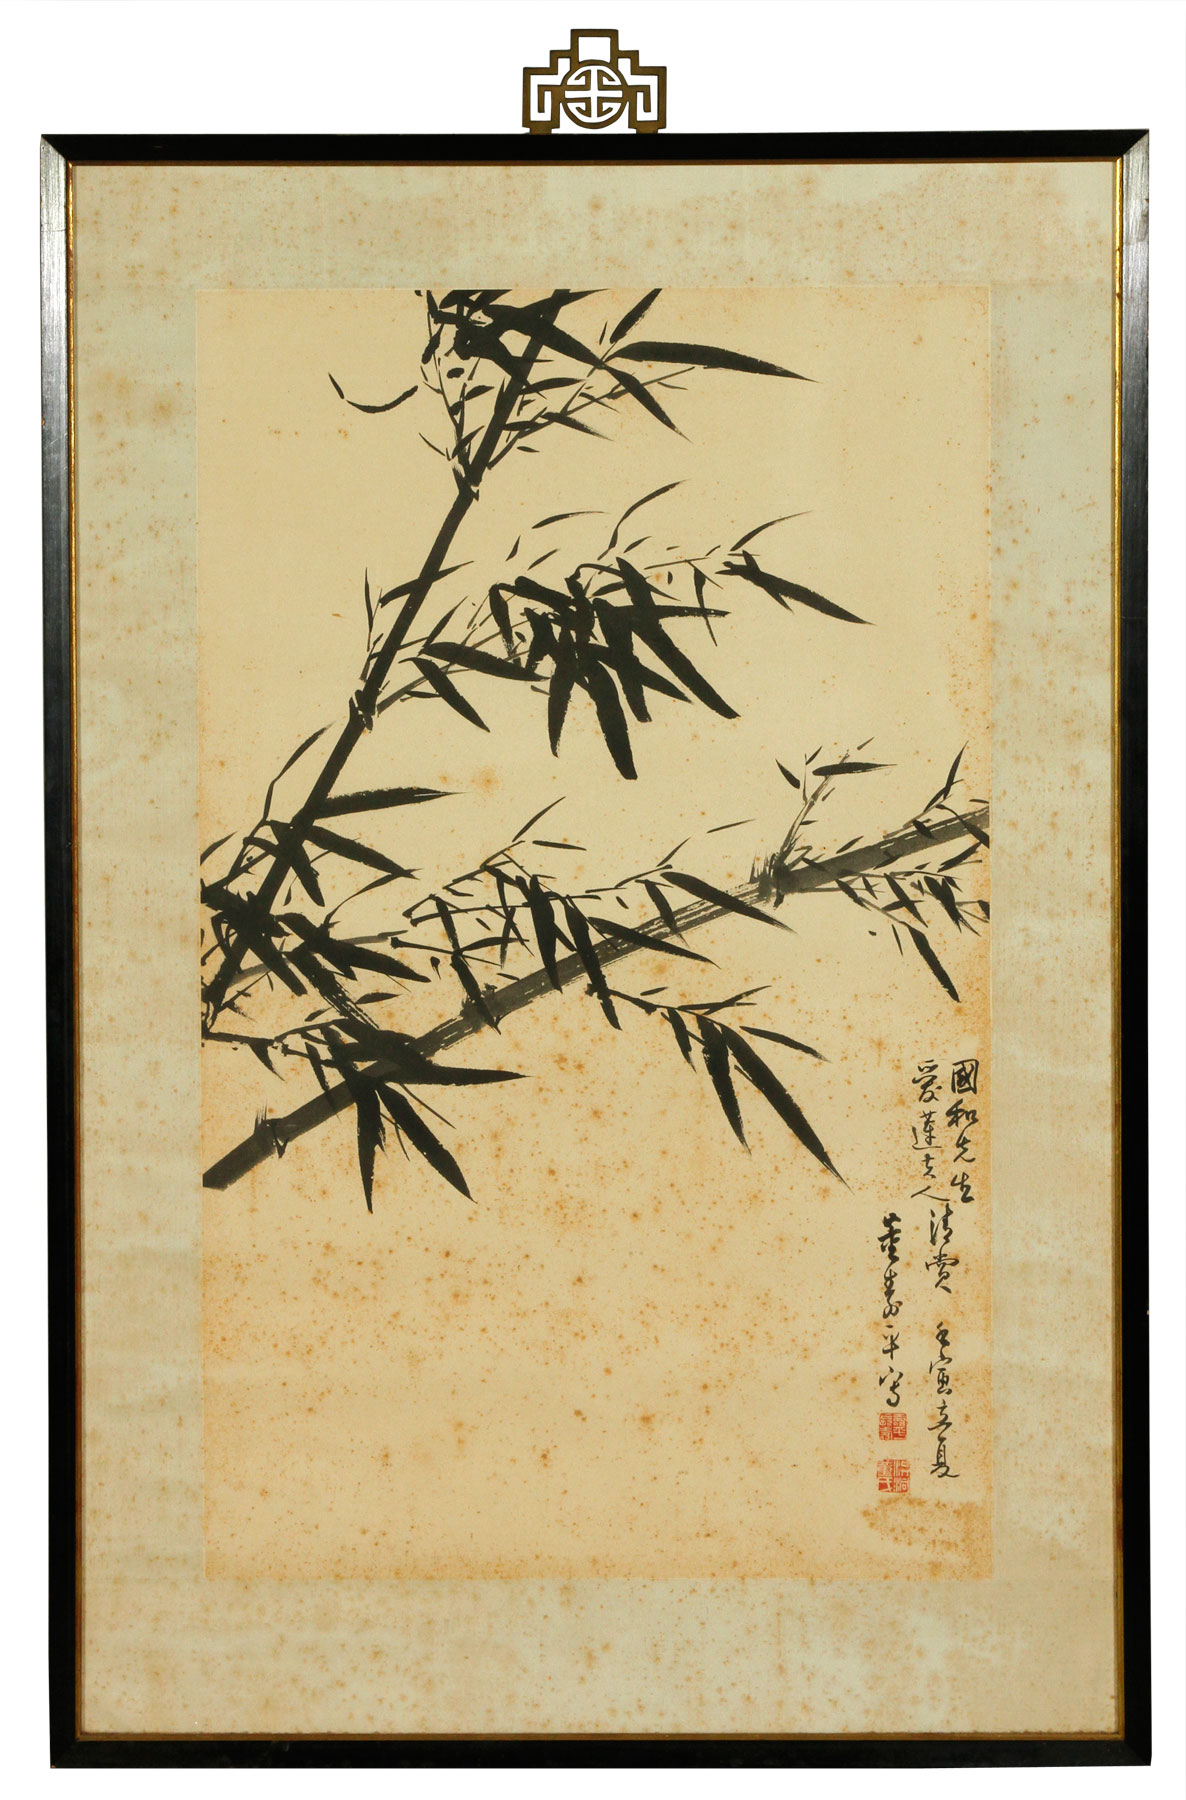 20th century Chinese painting, a study of bamboo, signed Dong Shou Ping 董寿平 (1904-1997).